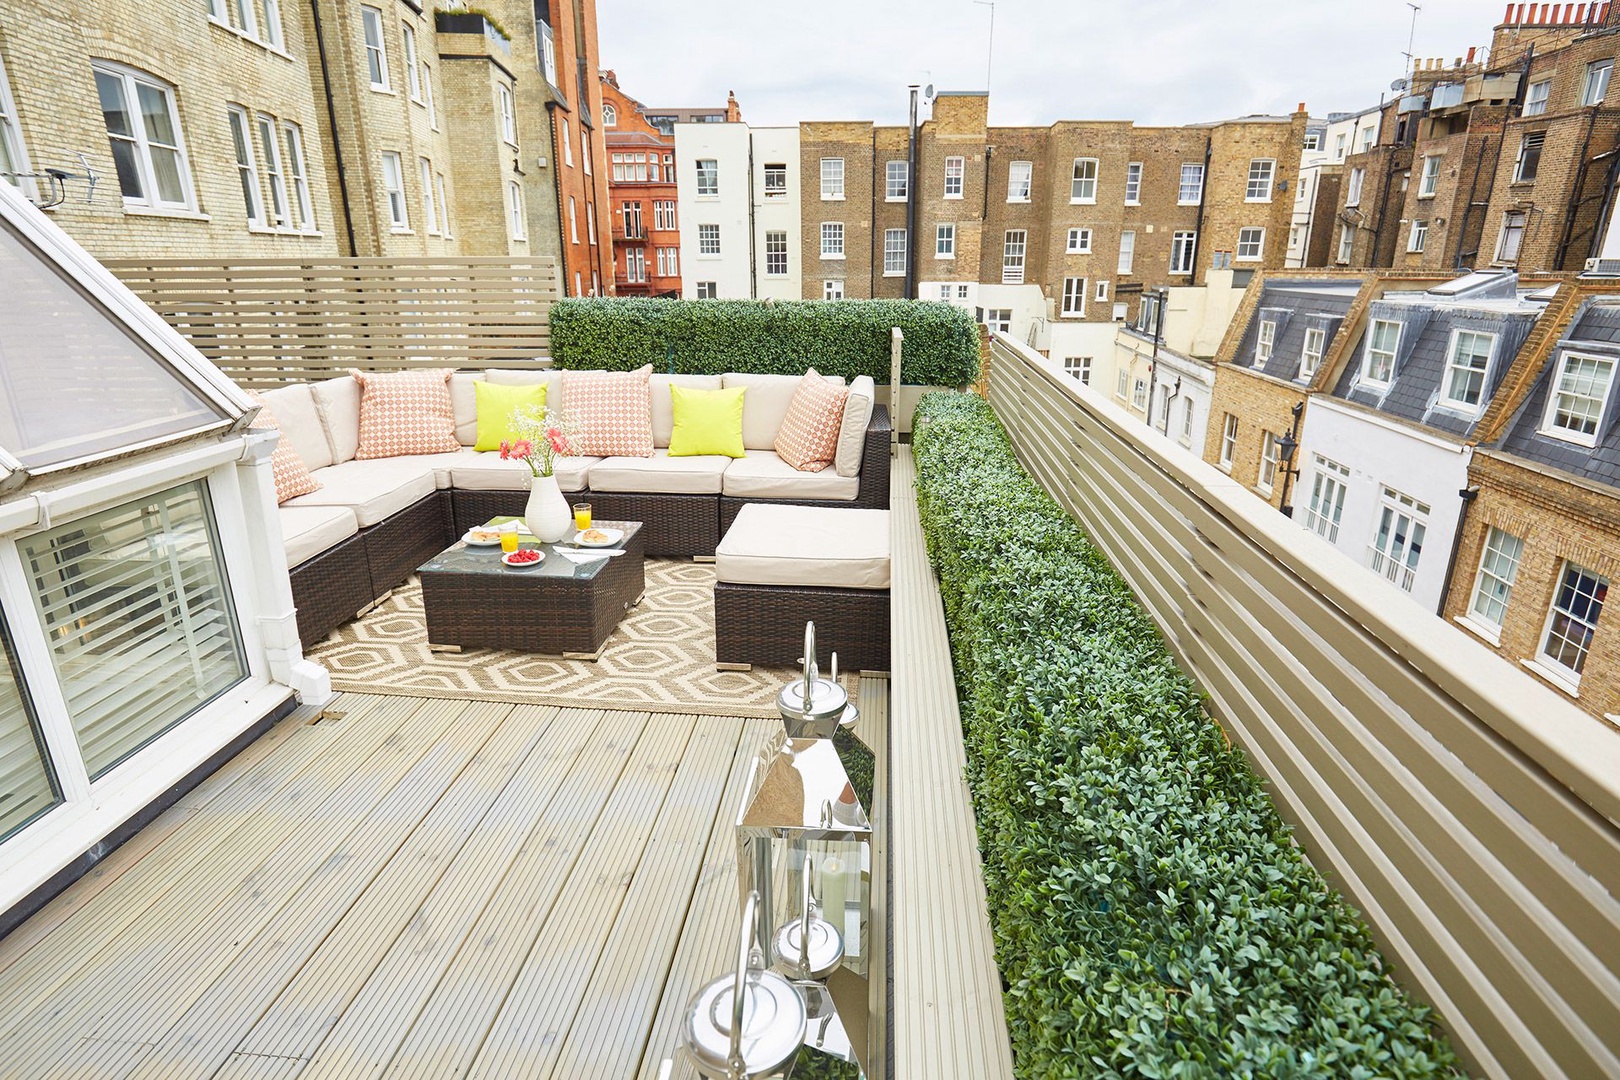 Relax in style on this expansive rooftop terrace